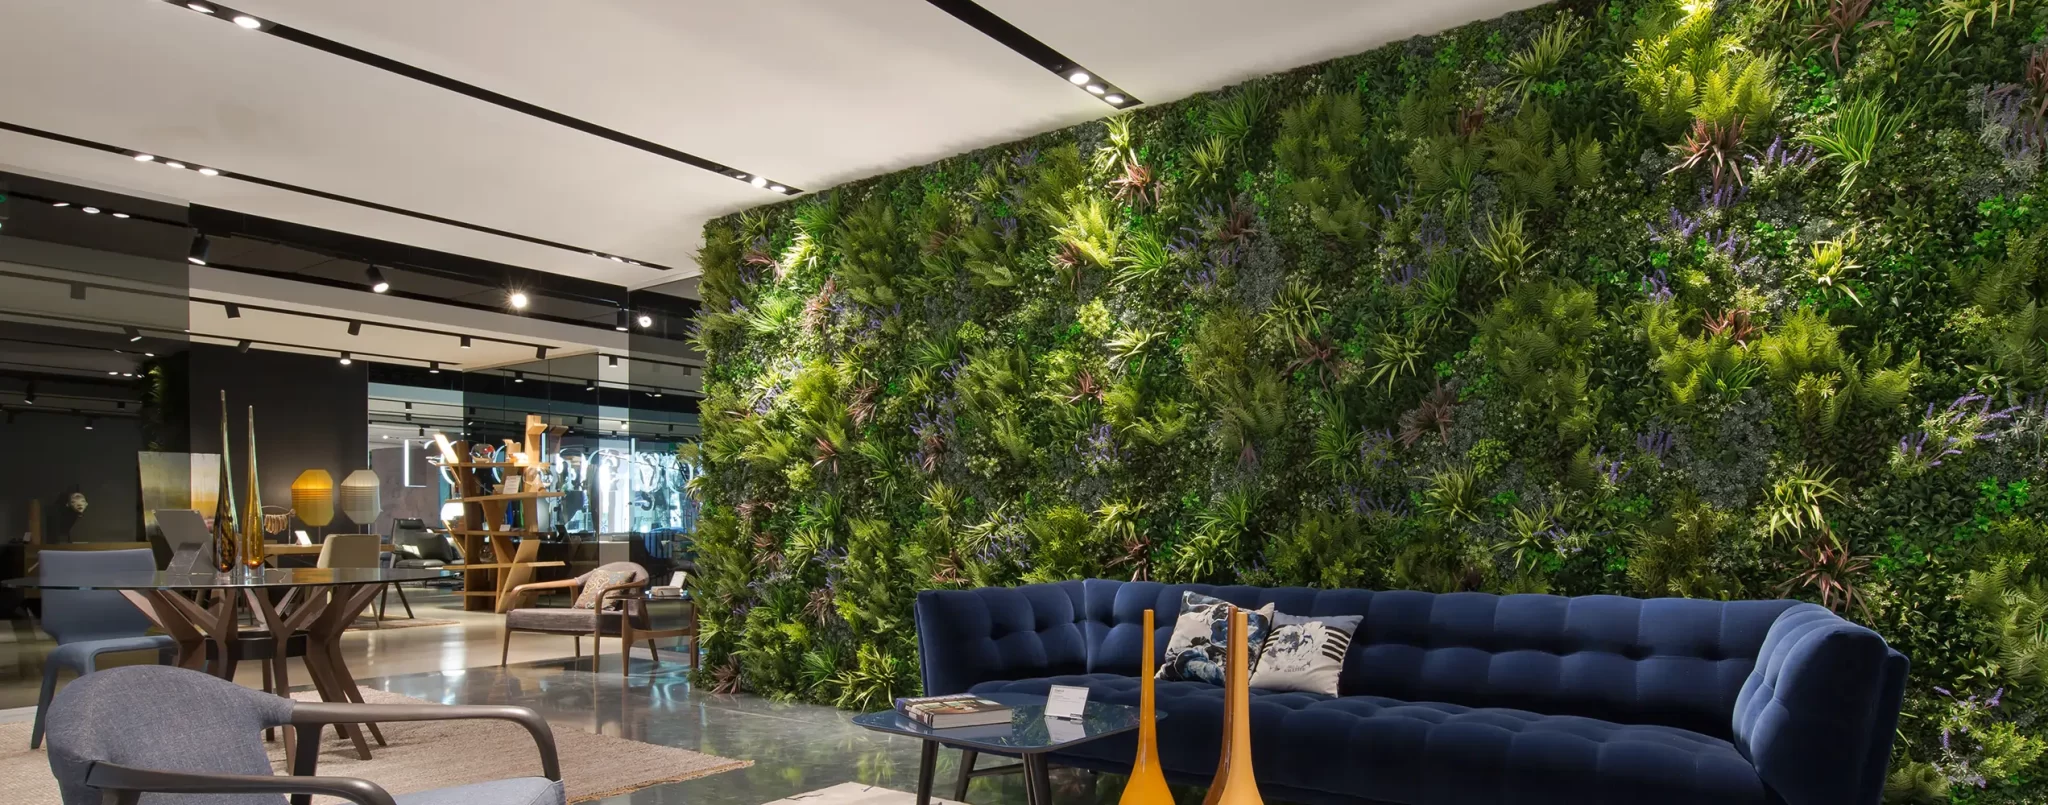 artificial living walls in lobby